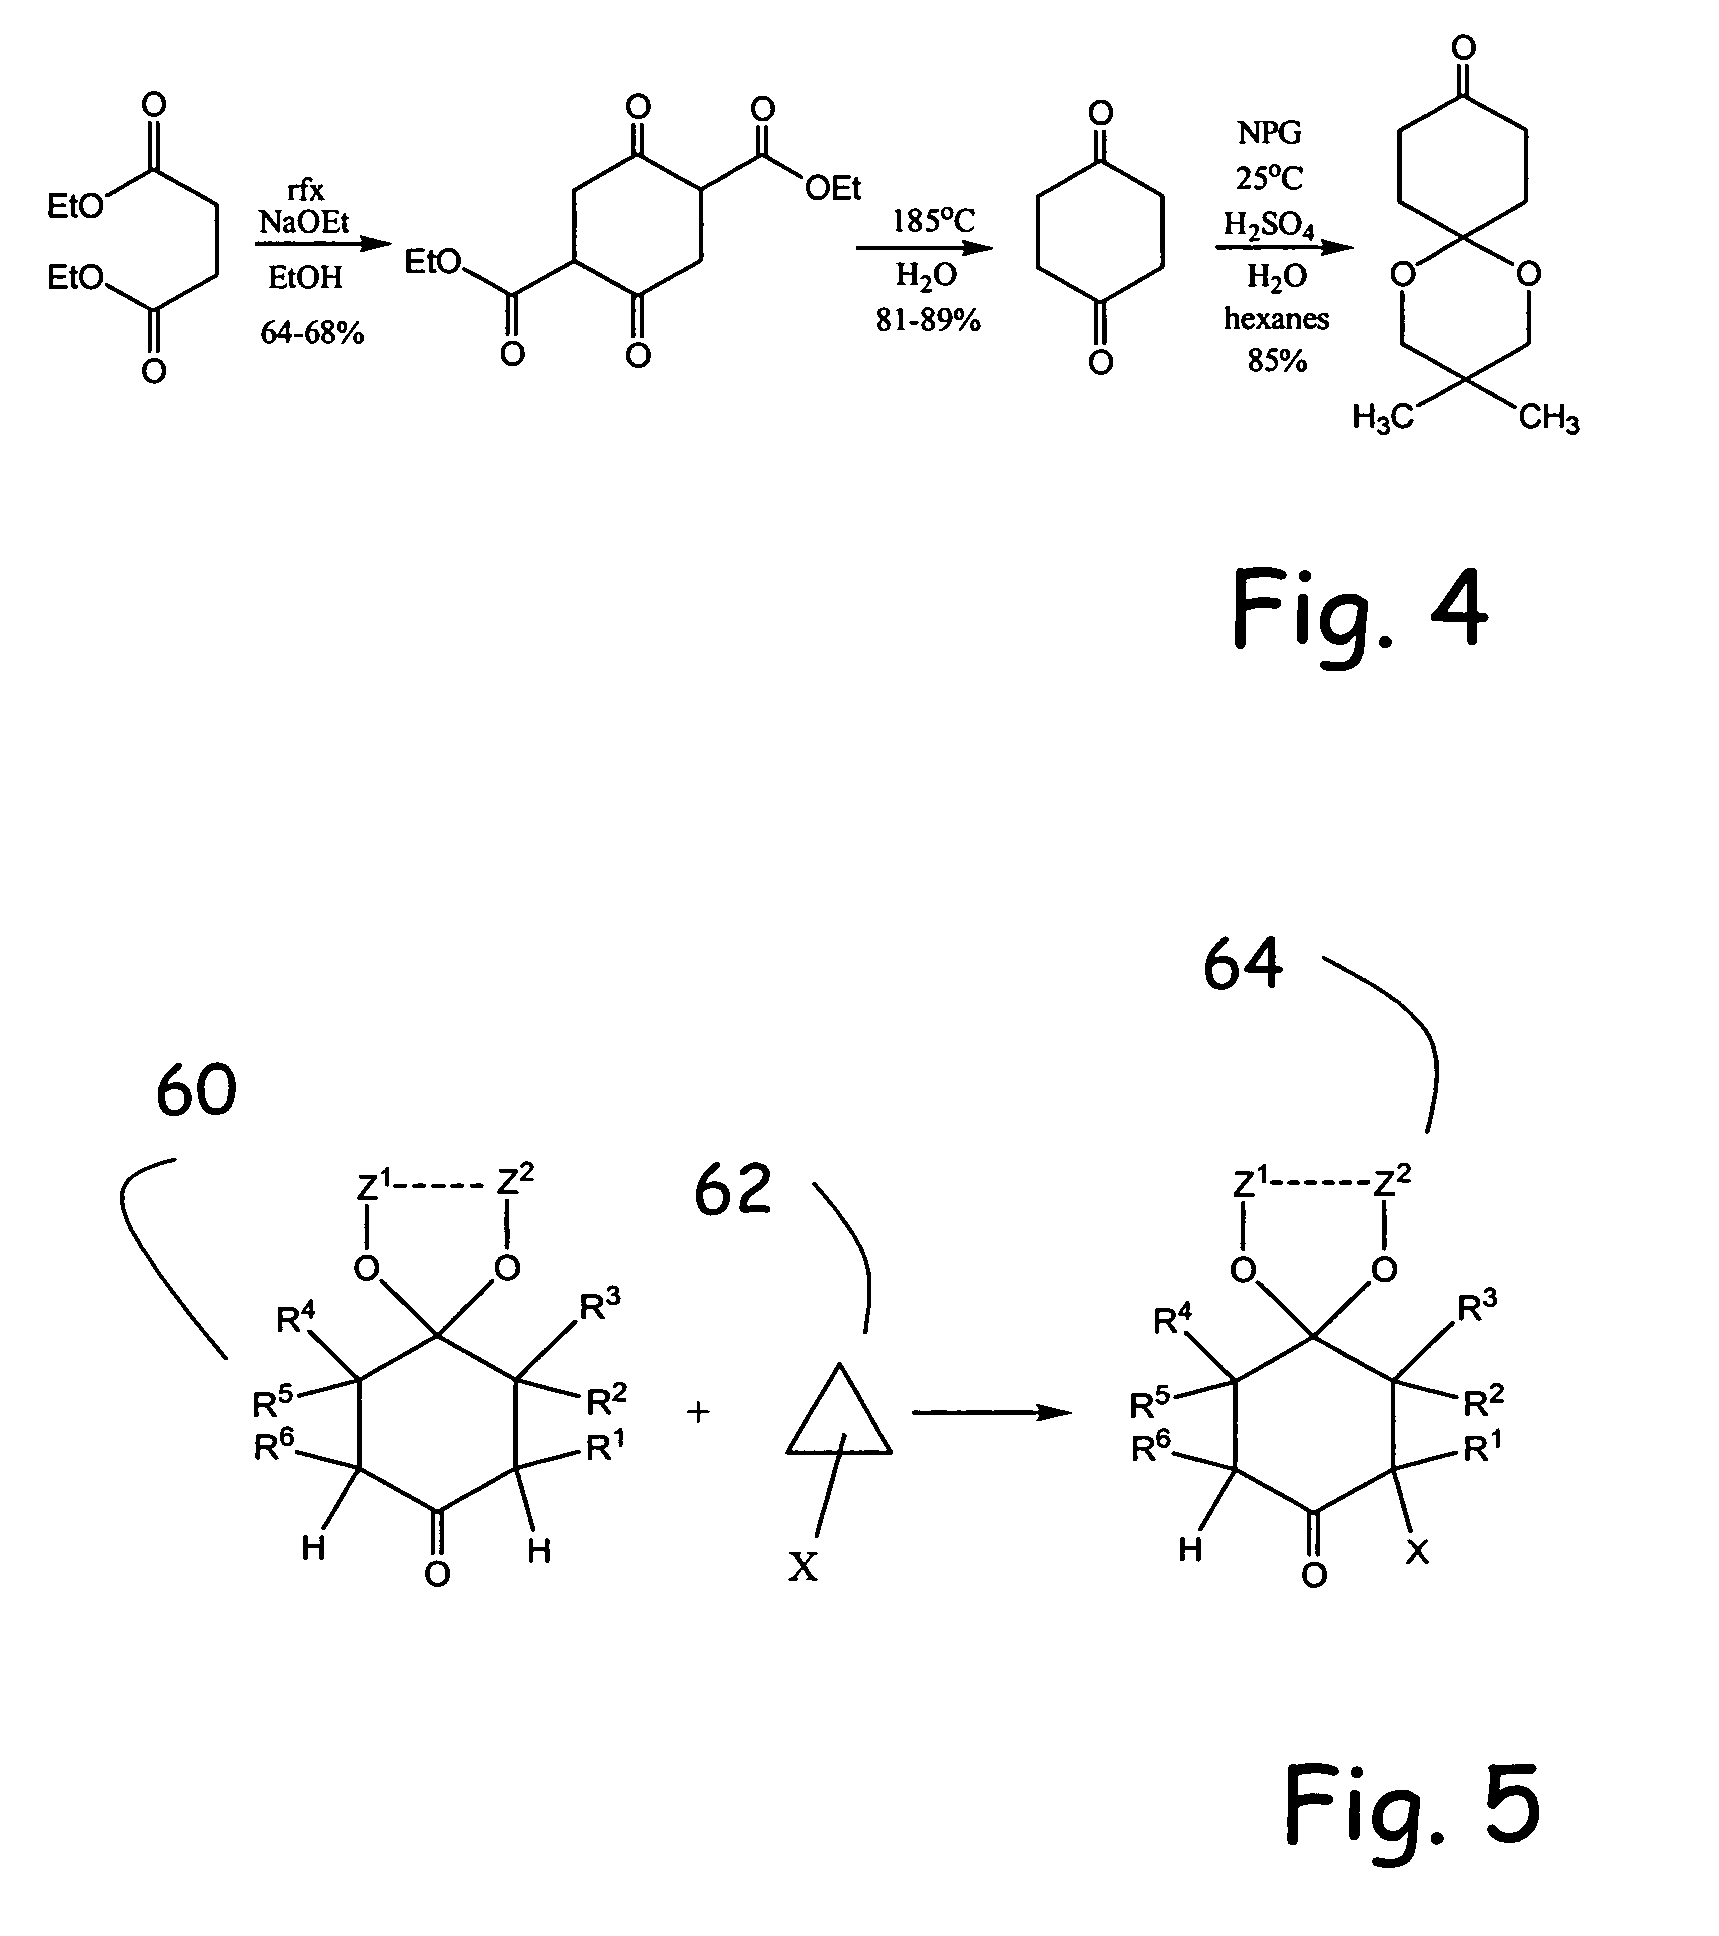 Alpha functionalization of cyclic, ketalized ketones and products therefrom